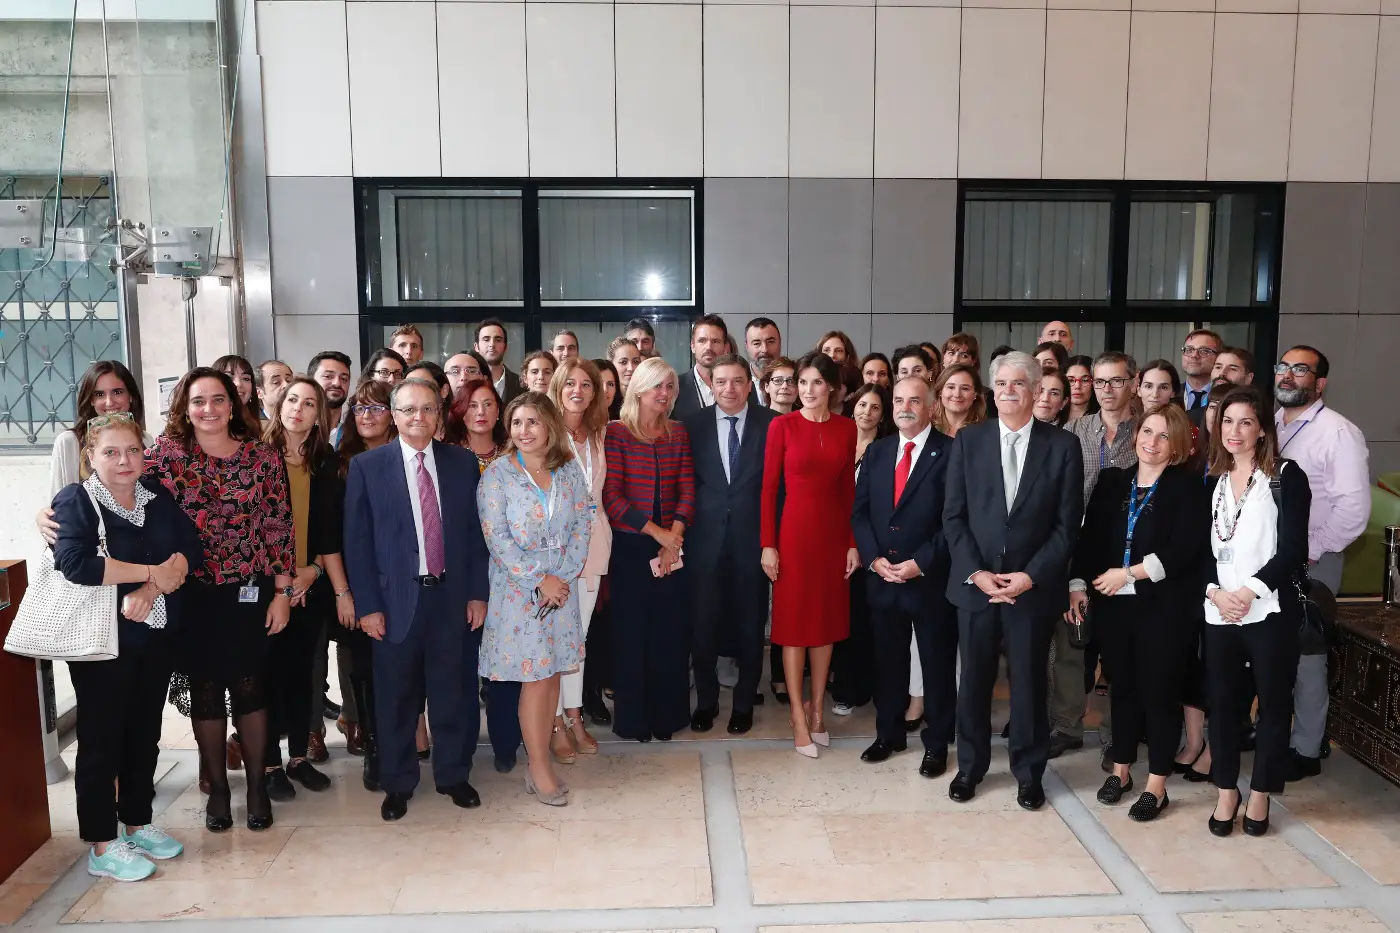 Queen Letizia of Spain visited Royal Academy of Spain in Rome